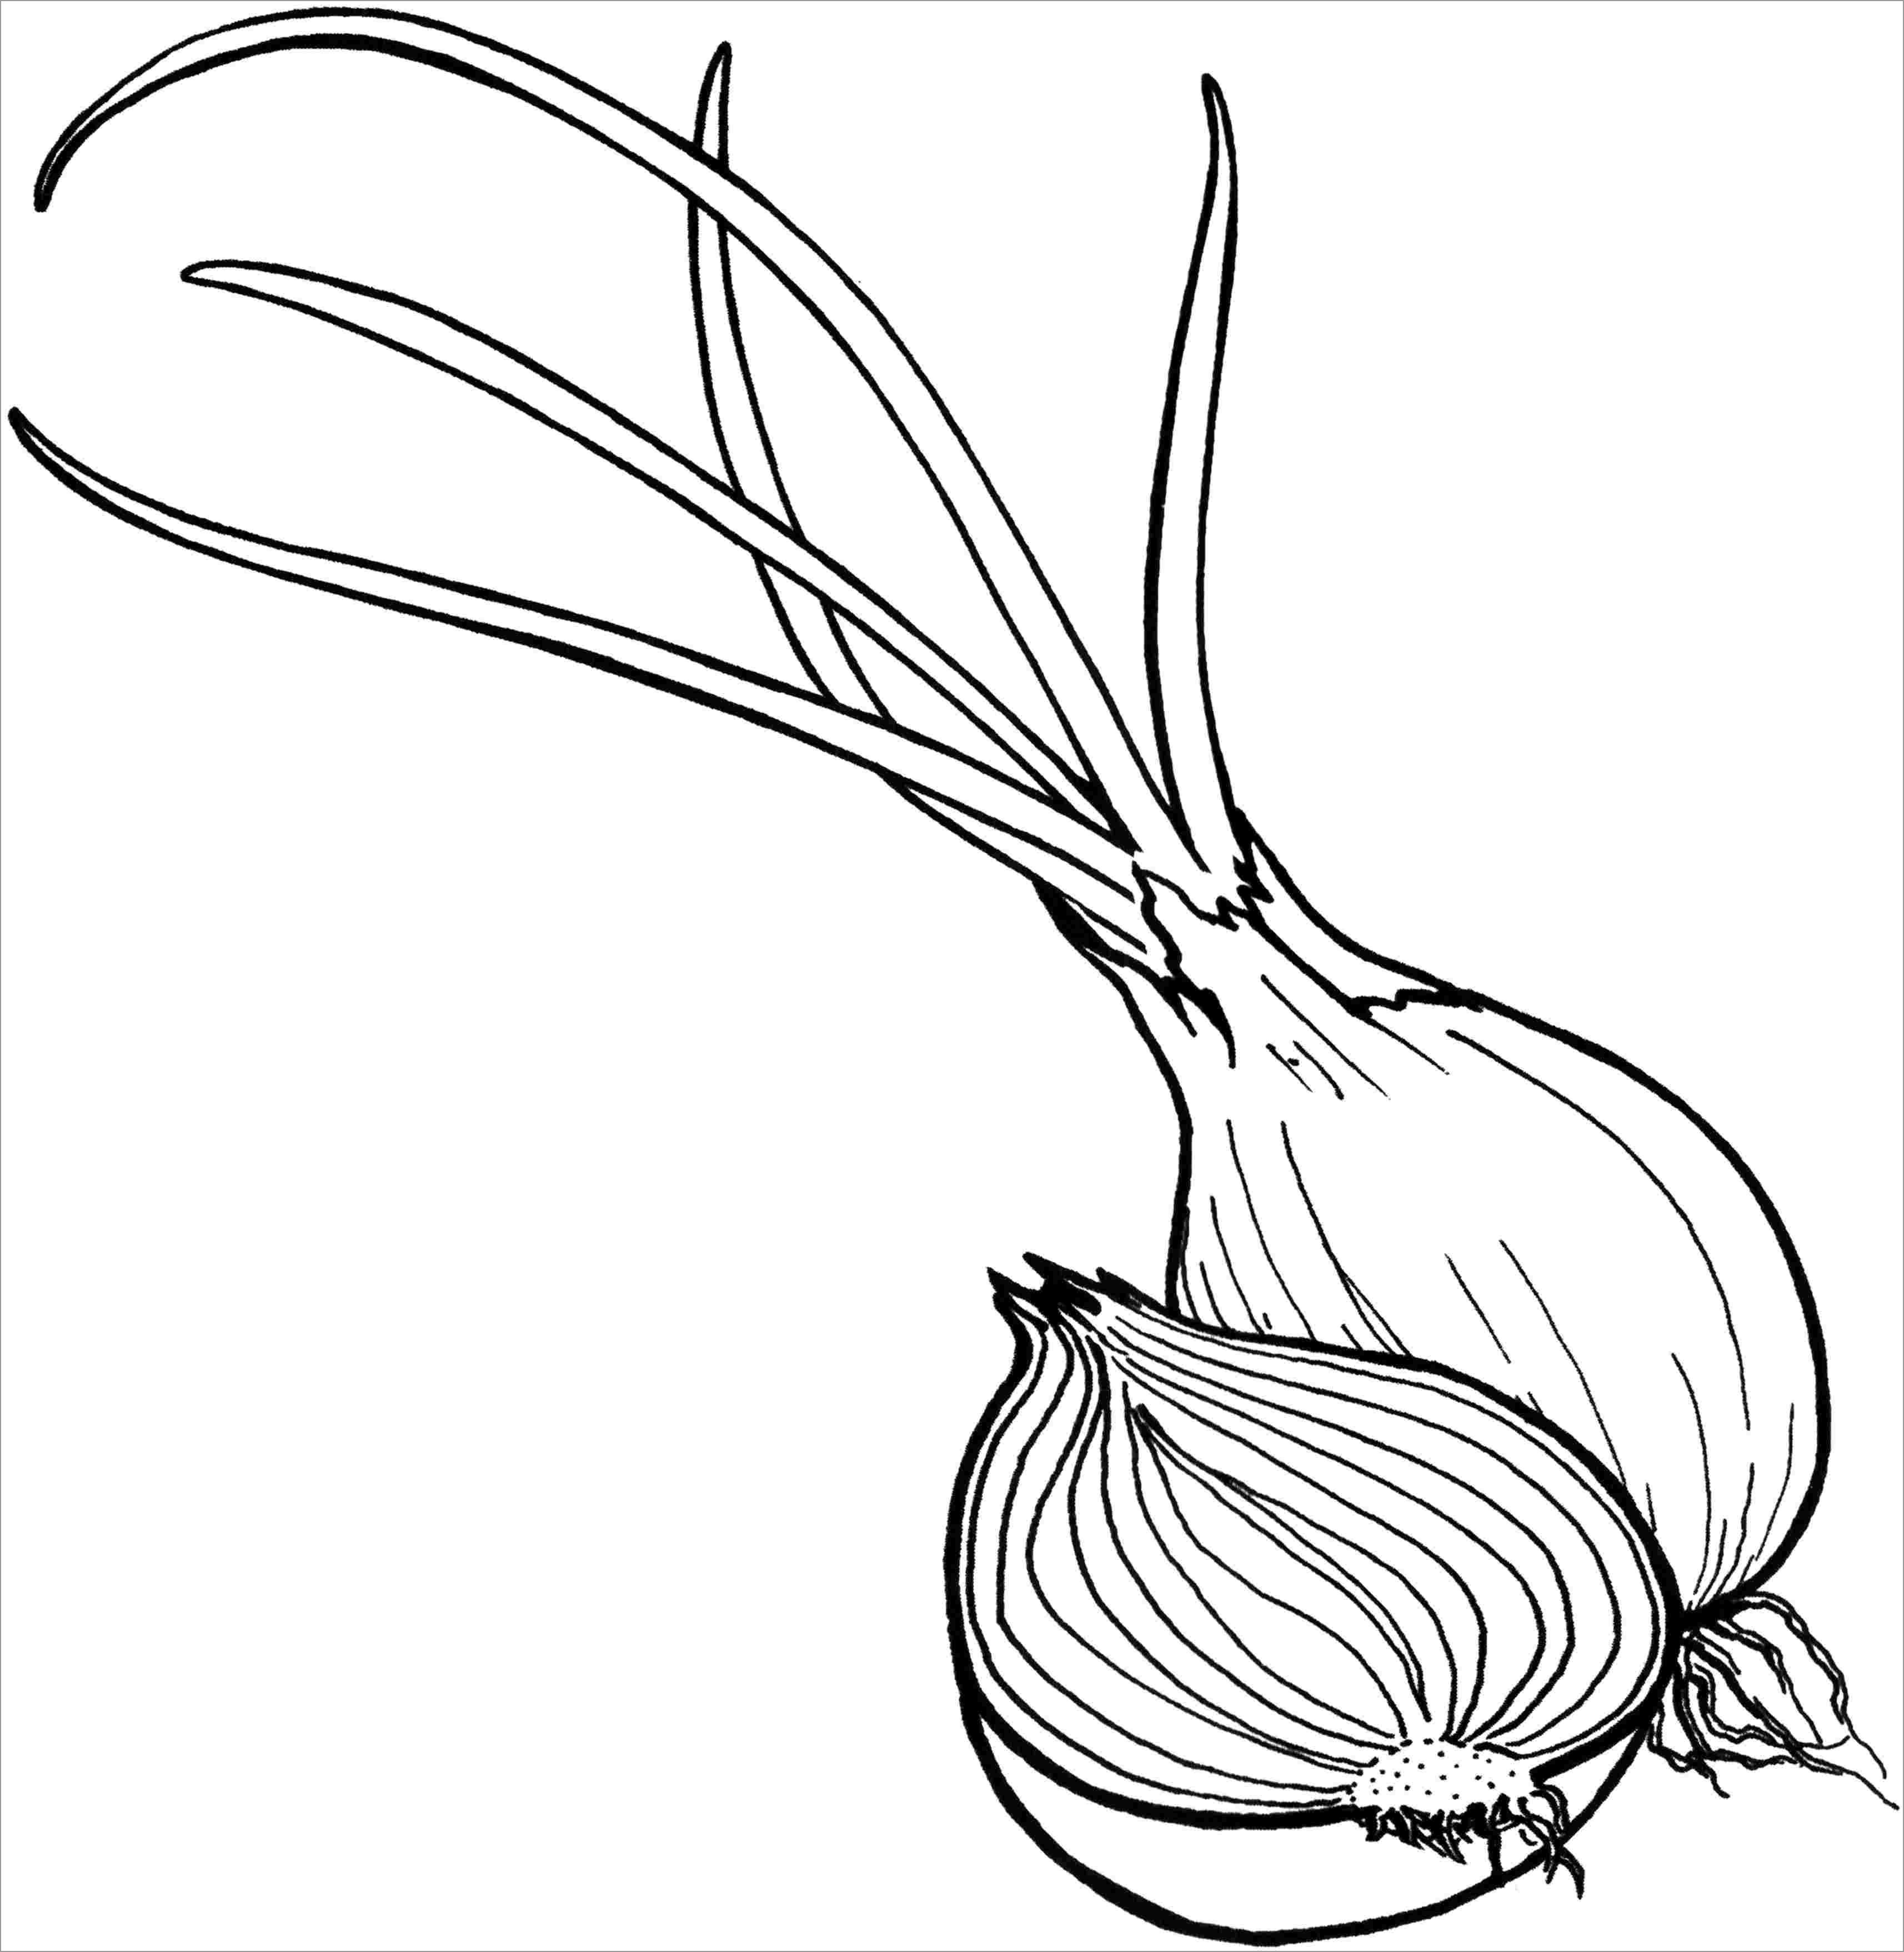 Sliced Onions Coloring Pages for Kids